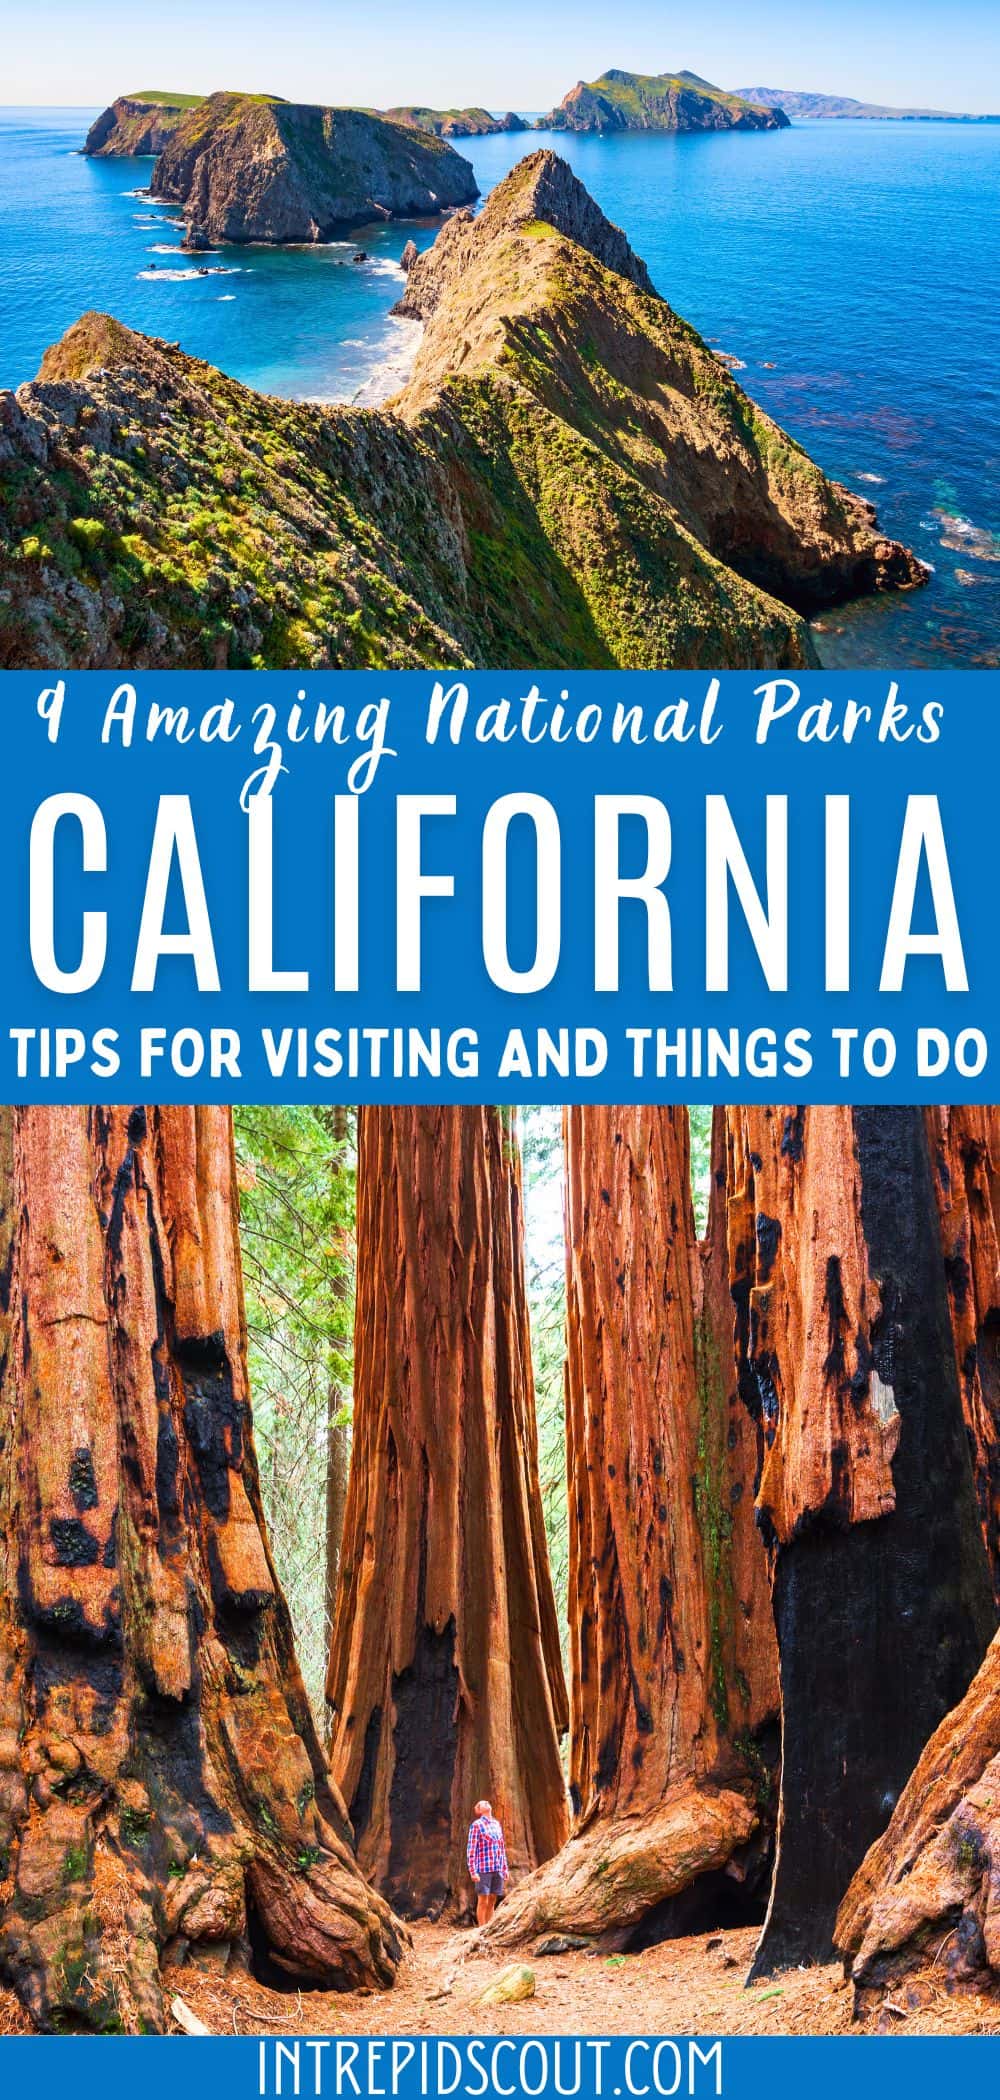 National Parks in California